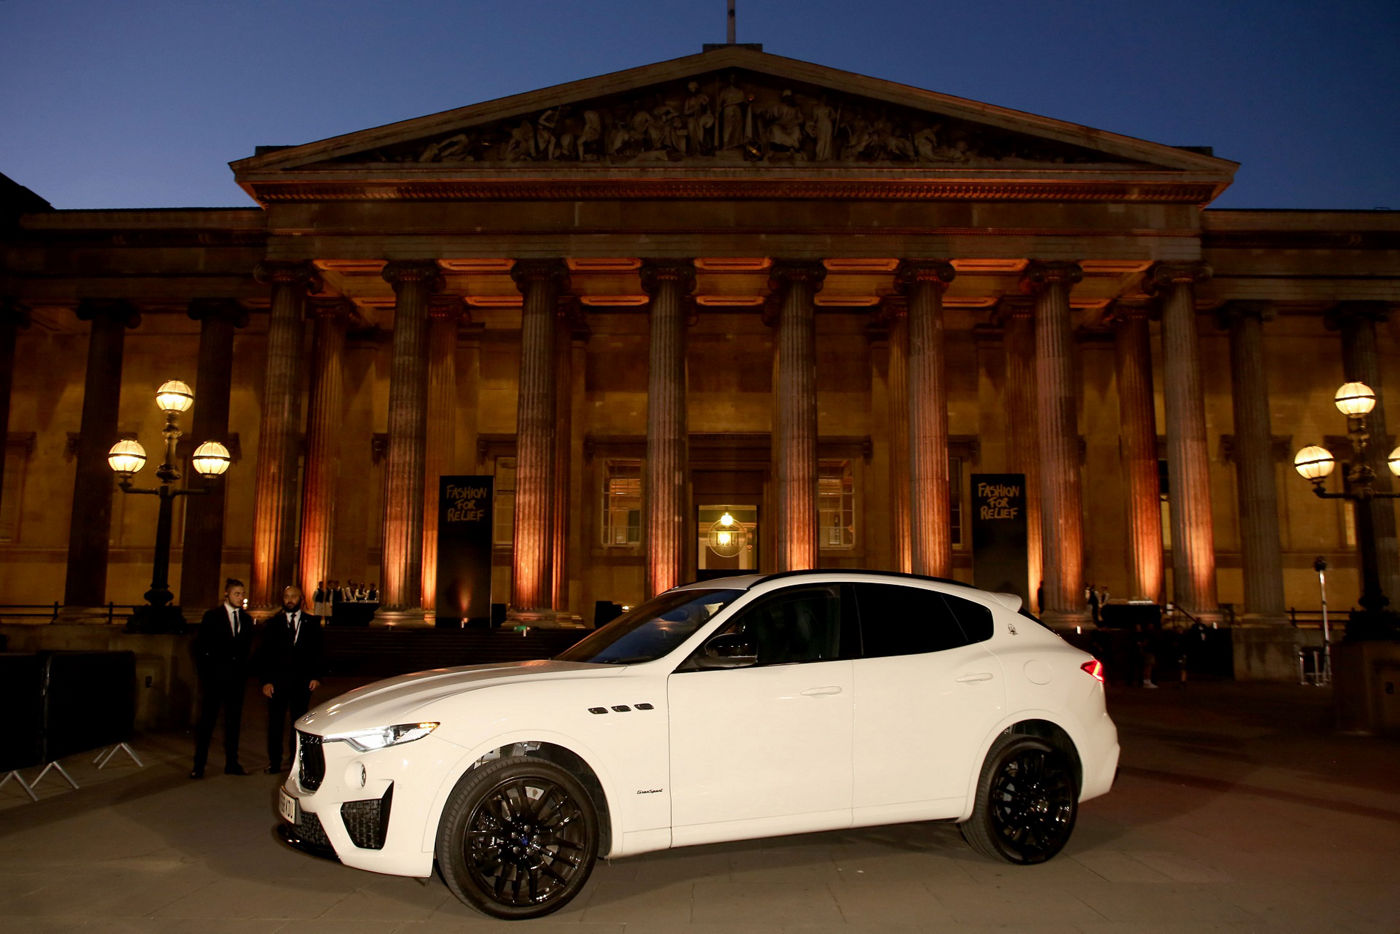 Maserati-Levante-chauffeur-s-VIPs-to-Fashion-For-Relief-at-The-British-Museum-on-September-14,-2019-in-London,-England-min